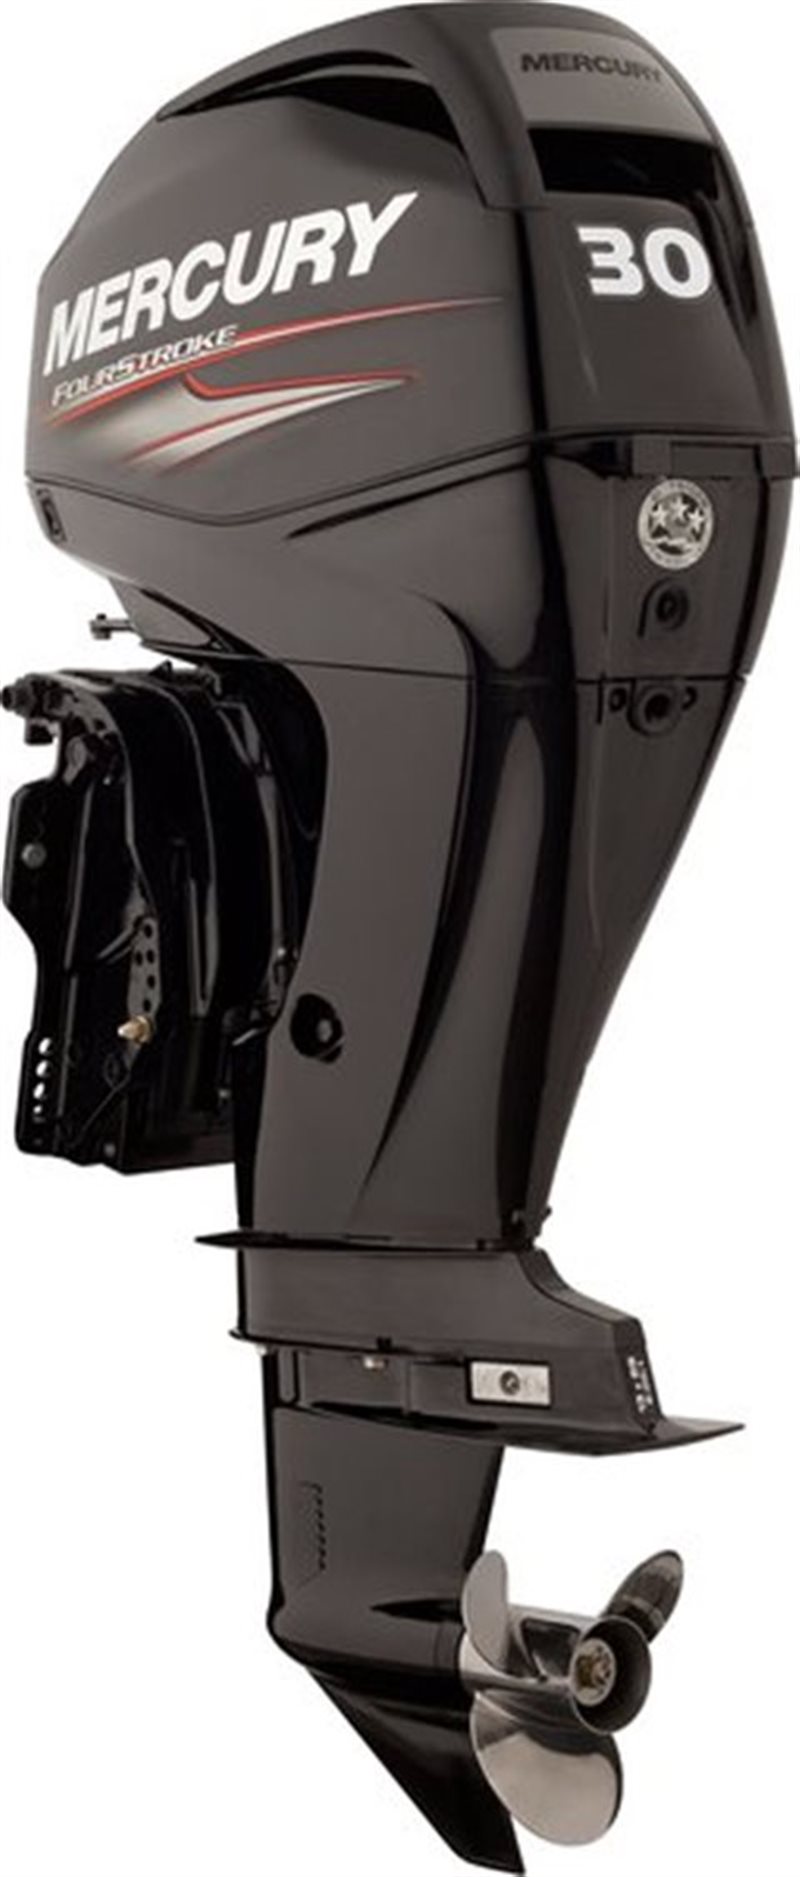 2020 Mercury Outboard FourStroke 25-30 hp 30 hp EFI at Fort Fremont Marine